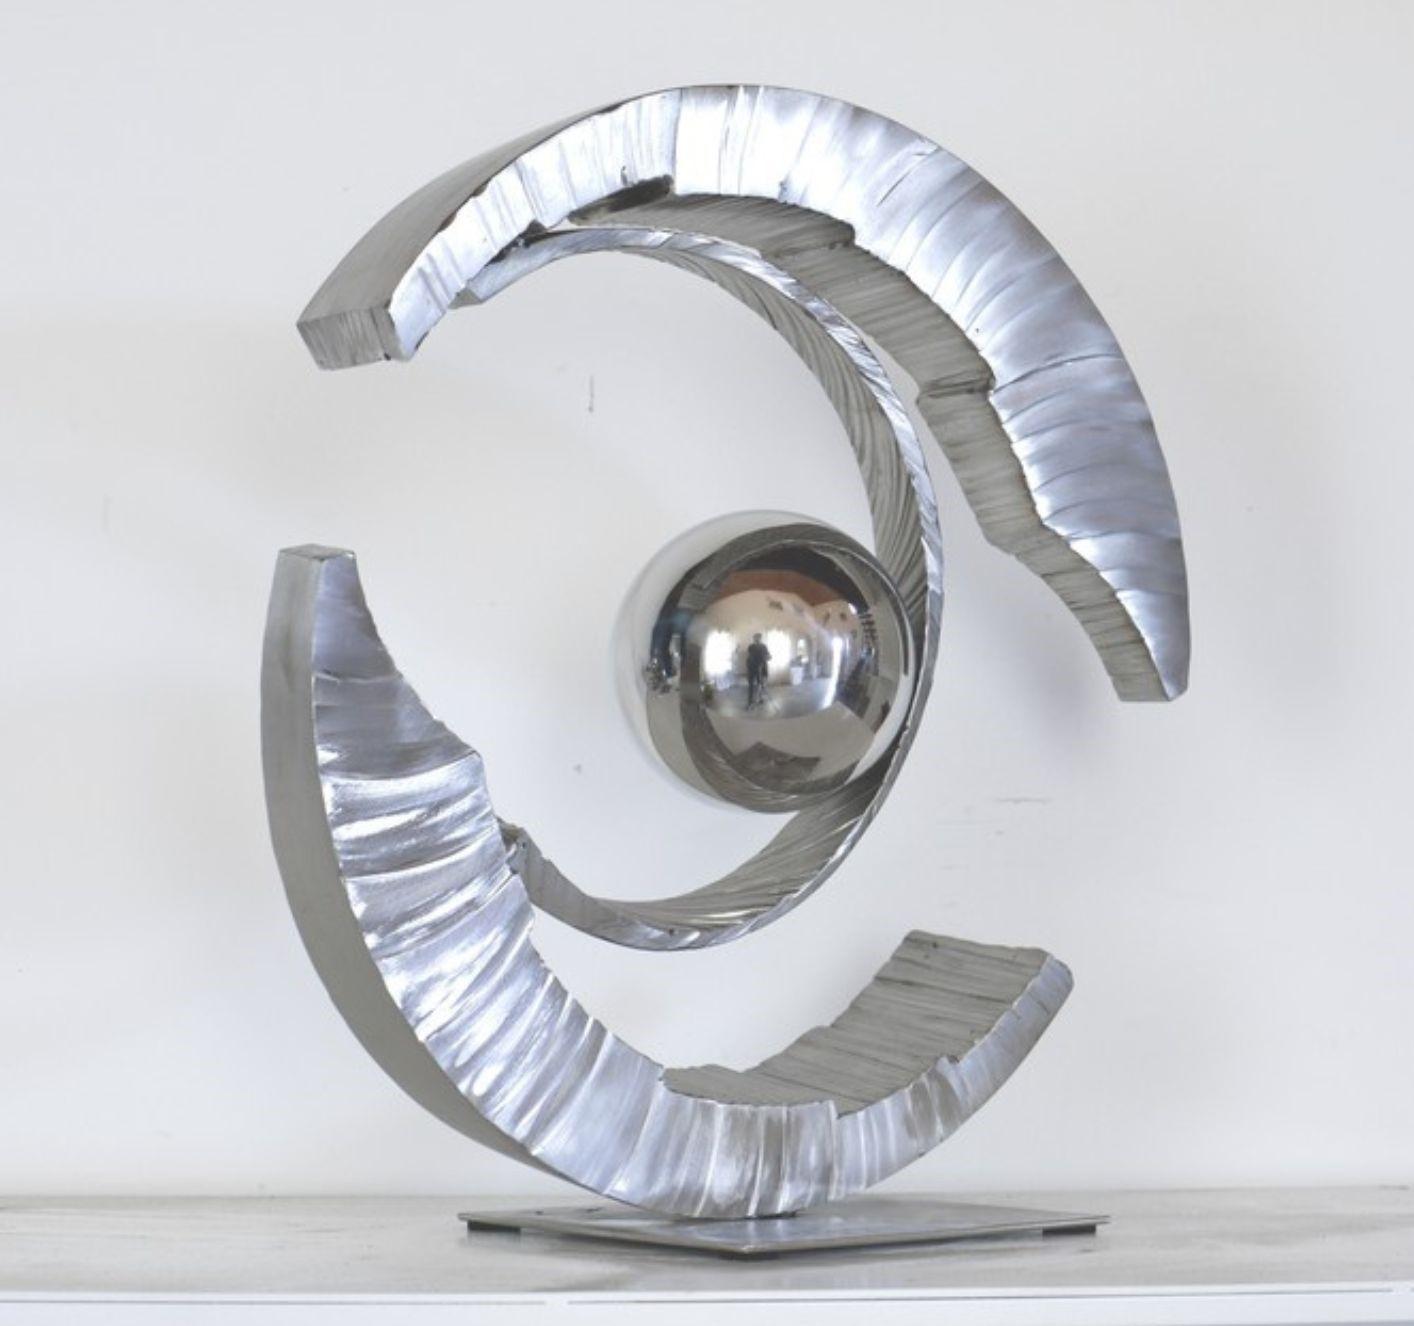 Abstract Sculpture Guillaume Roche - Exclos 267